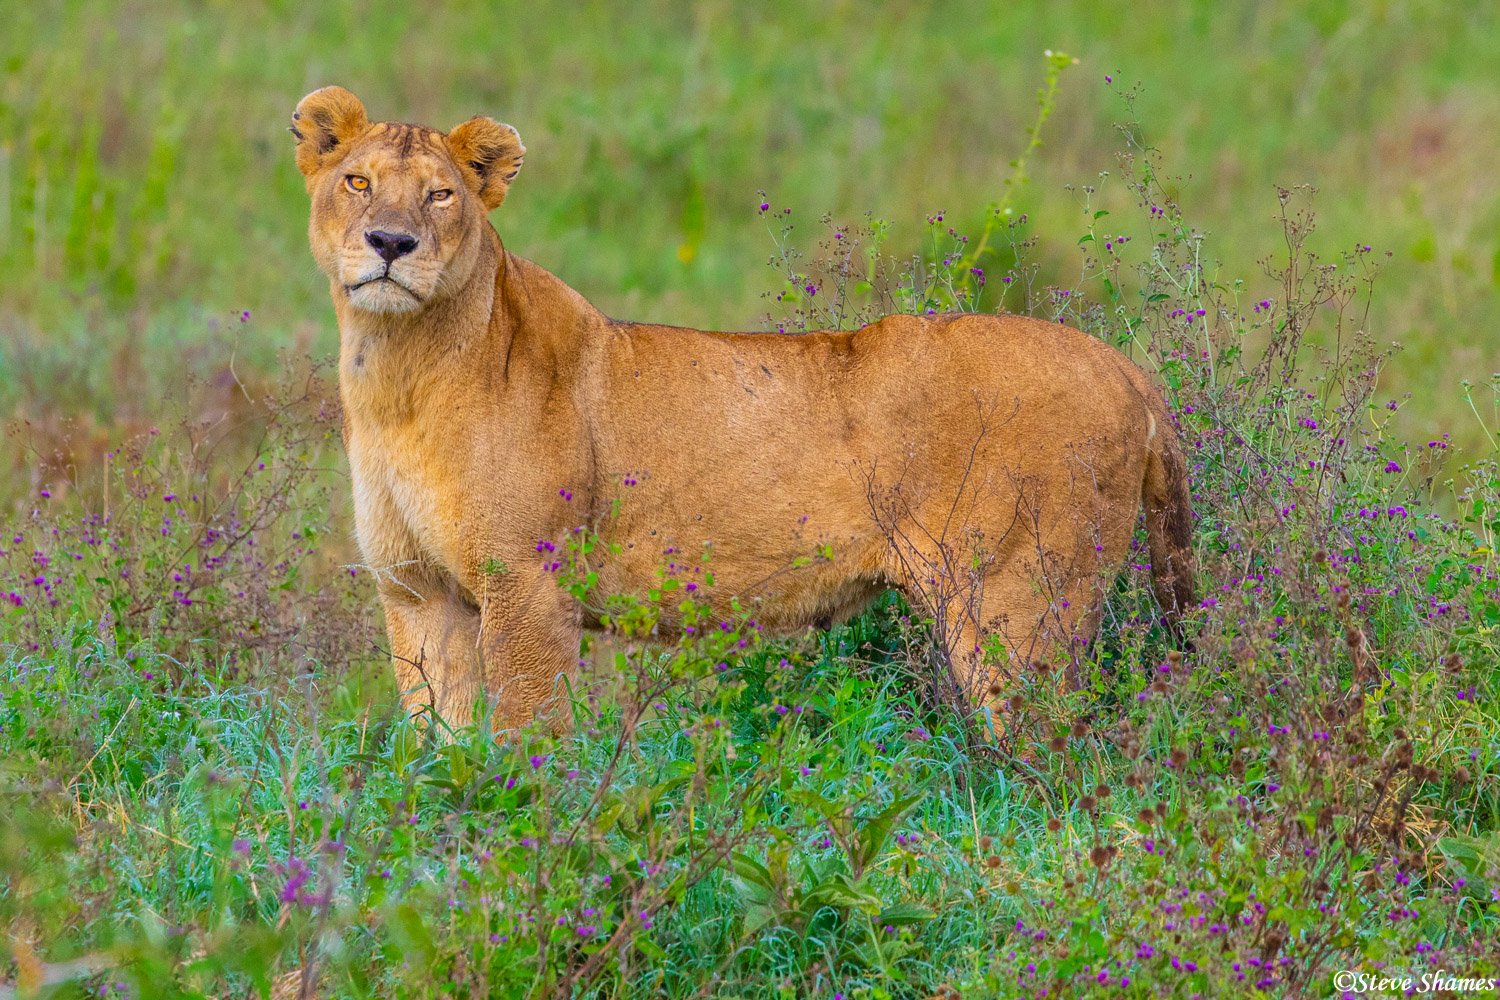 A Serengeti lioness in the early morning amidst the little purple flowers.